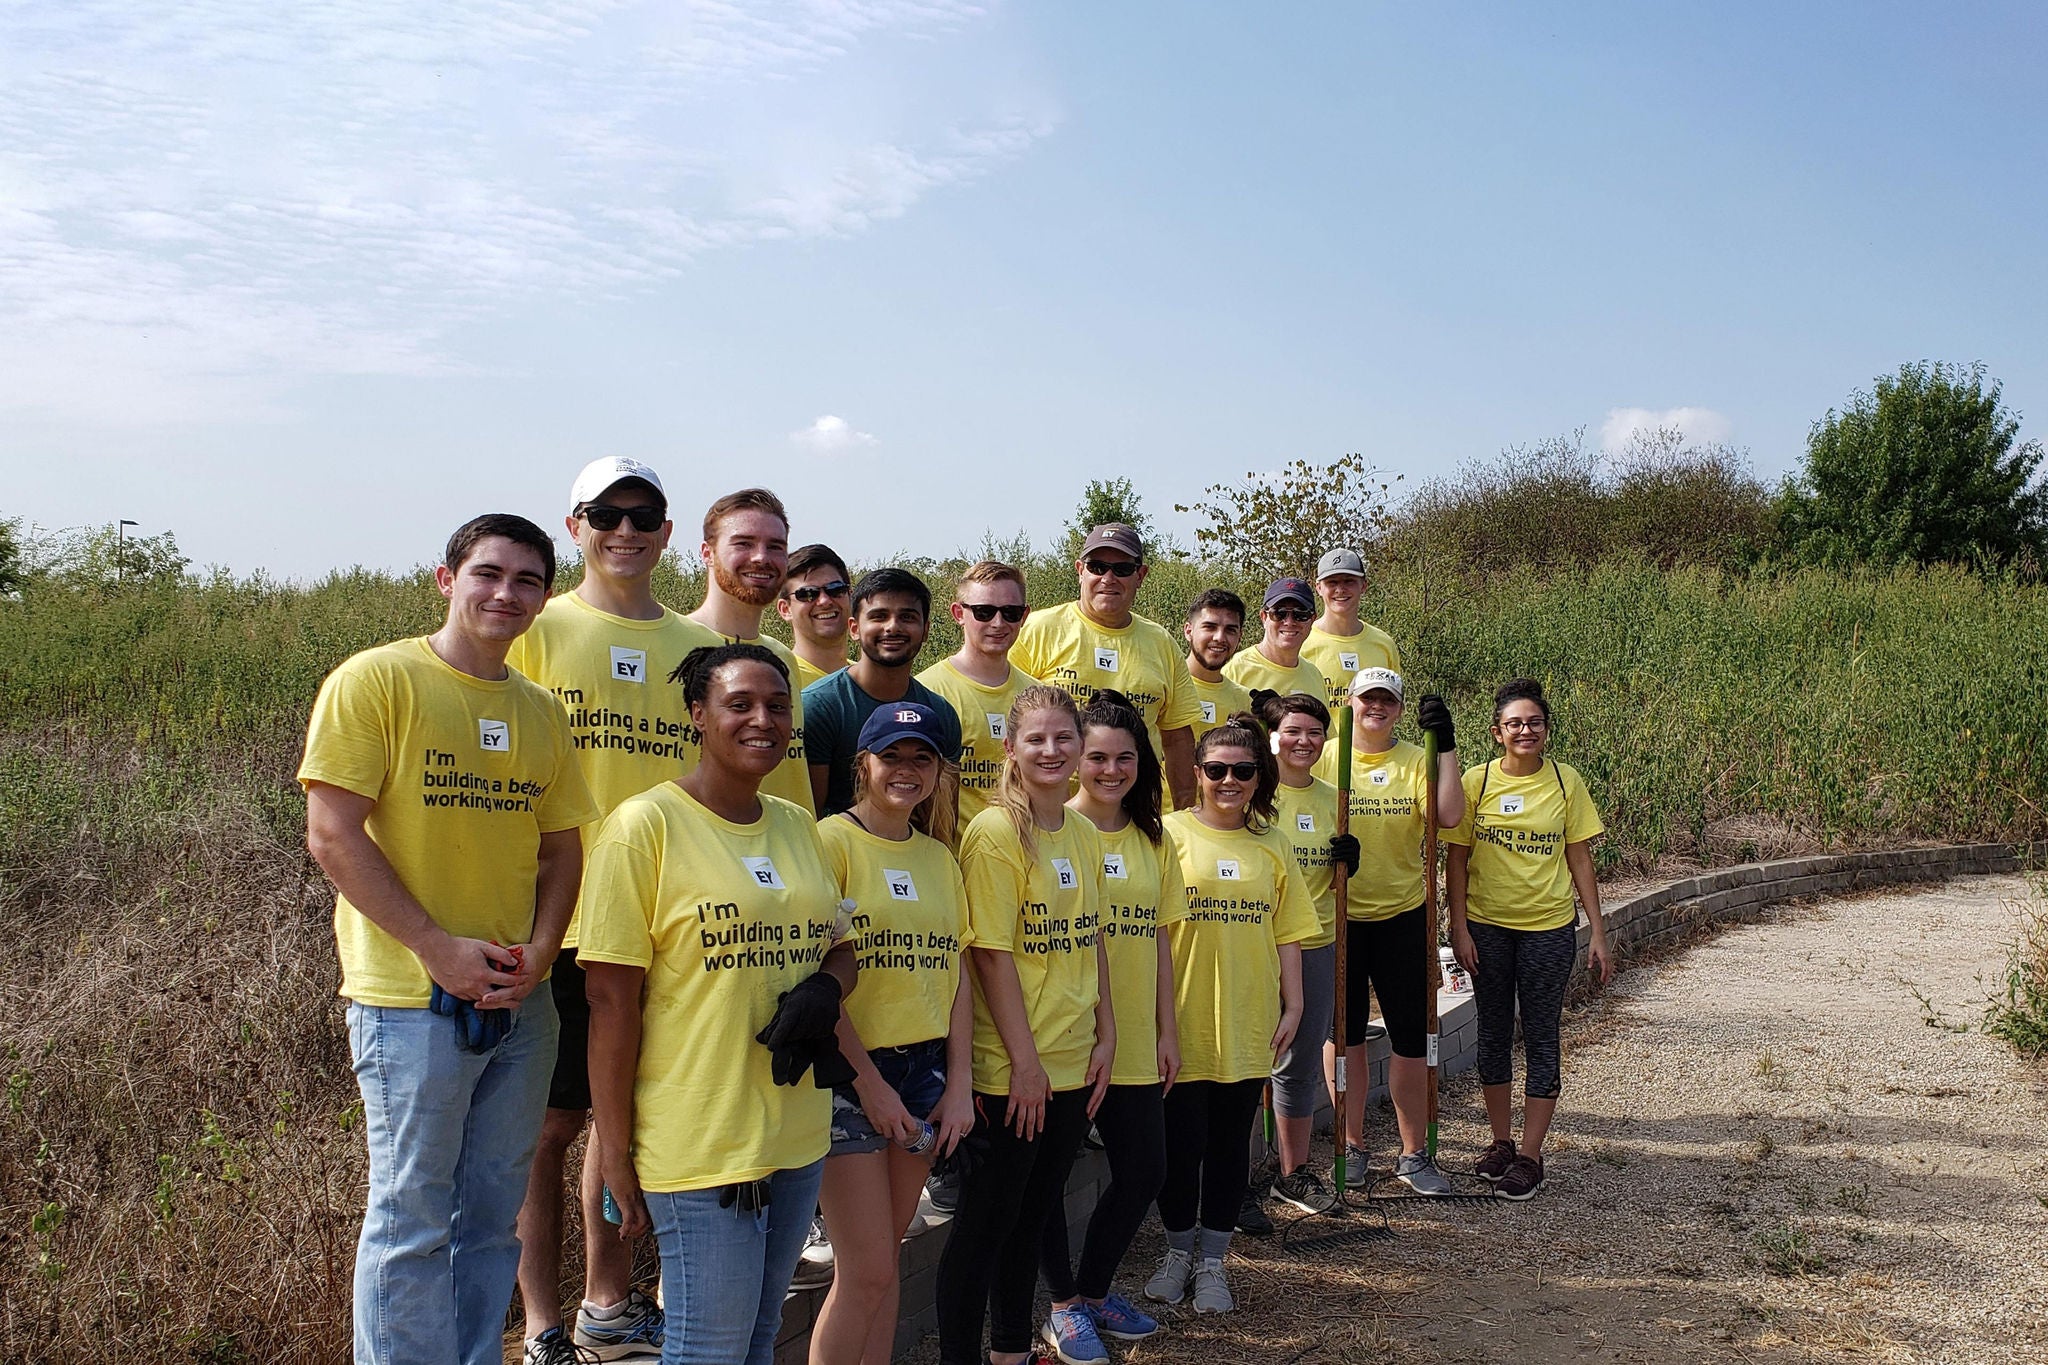 EY employees working on connect day in Dallas Texas